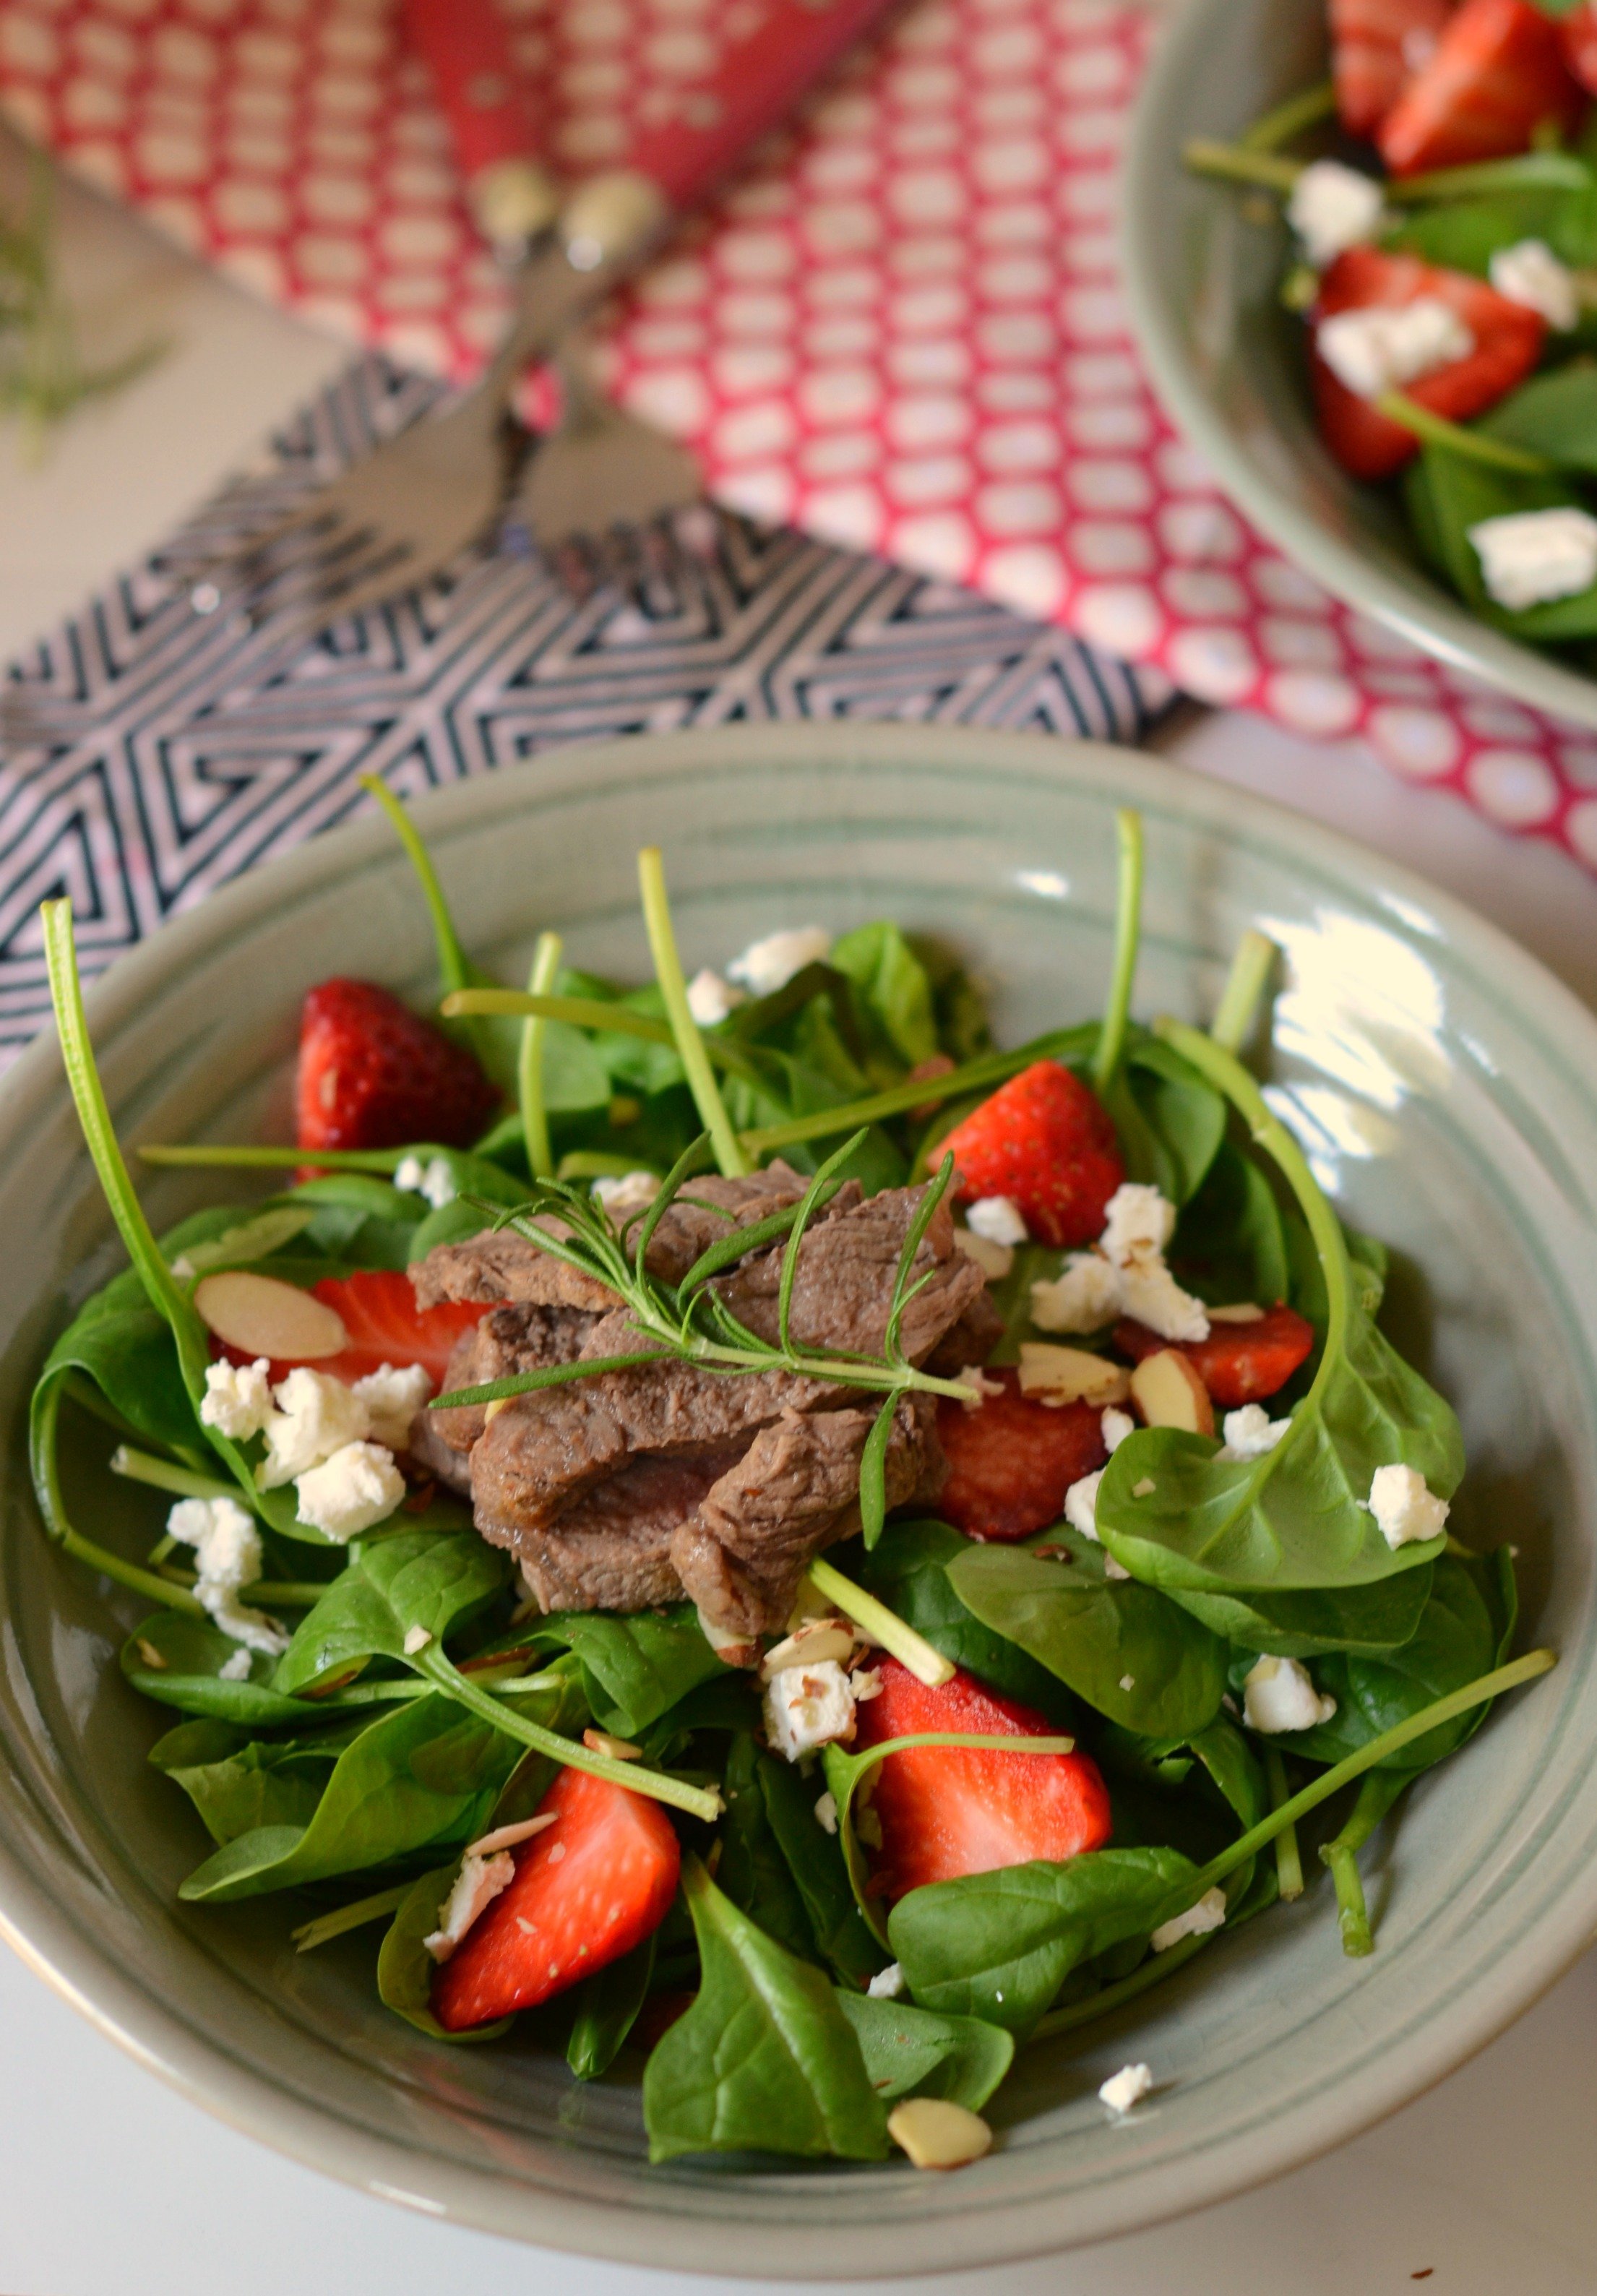  bowl of spinach and other greens topped with strawberries, steak and goat cheese